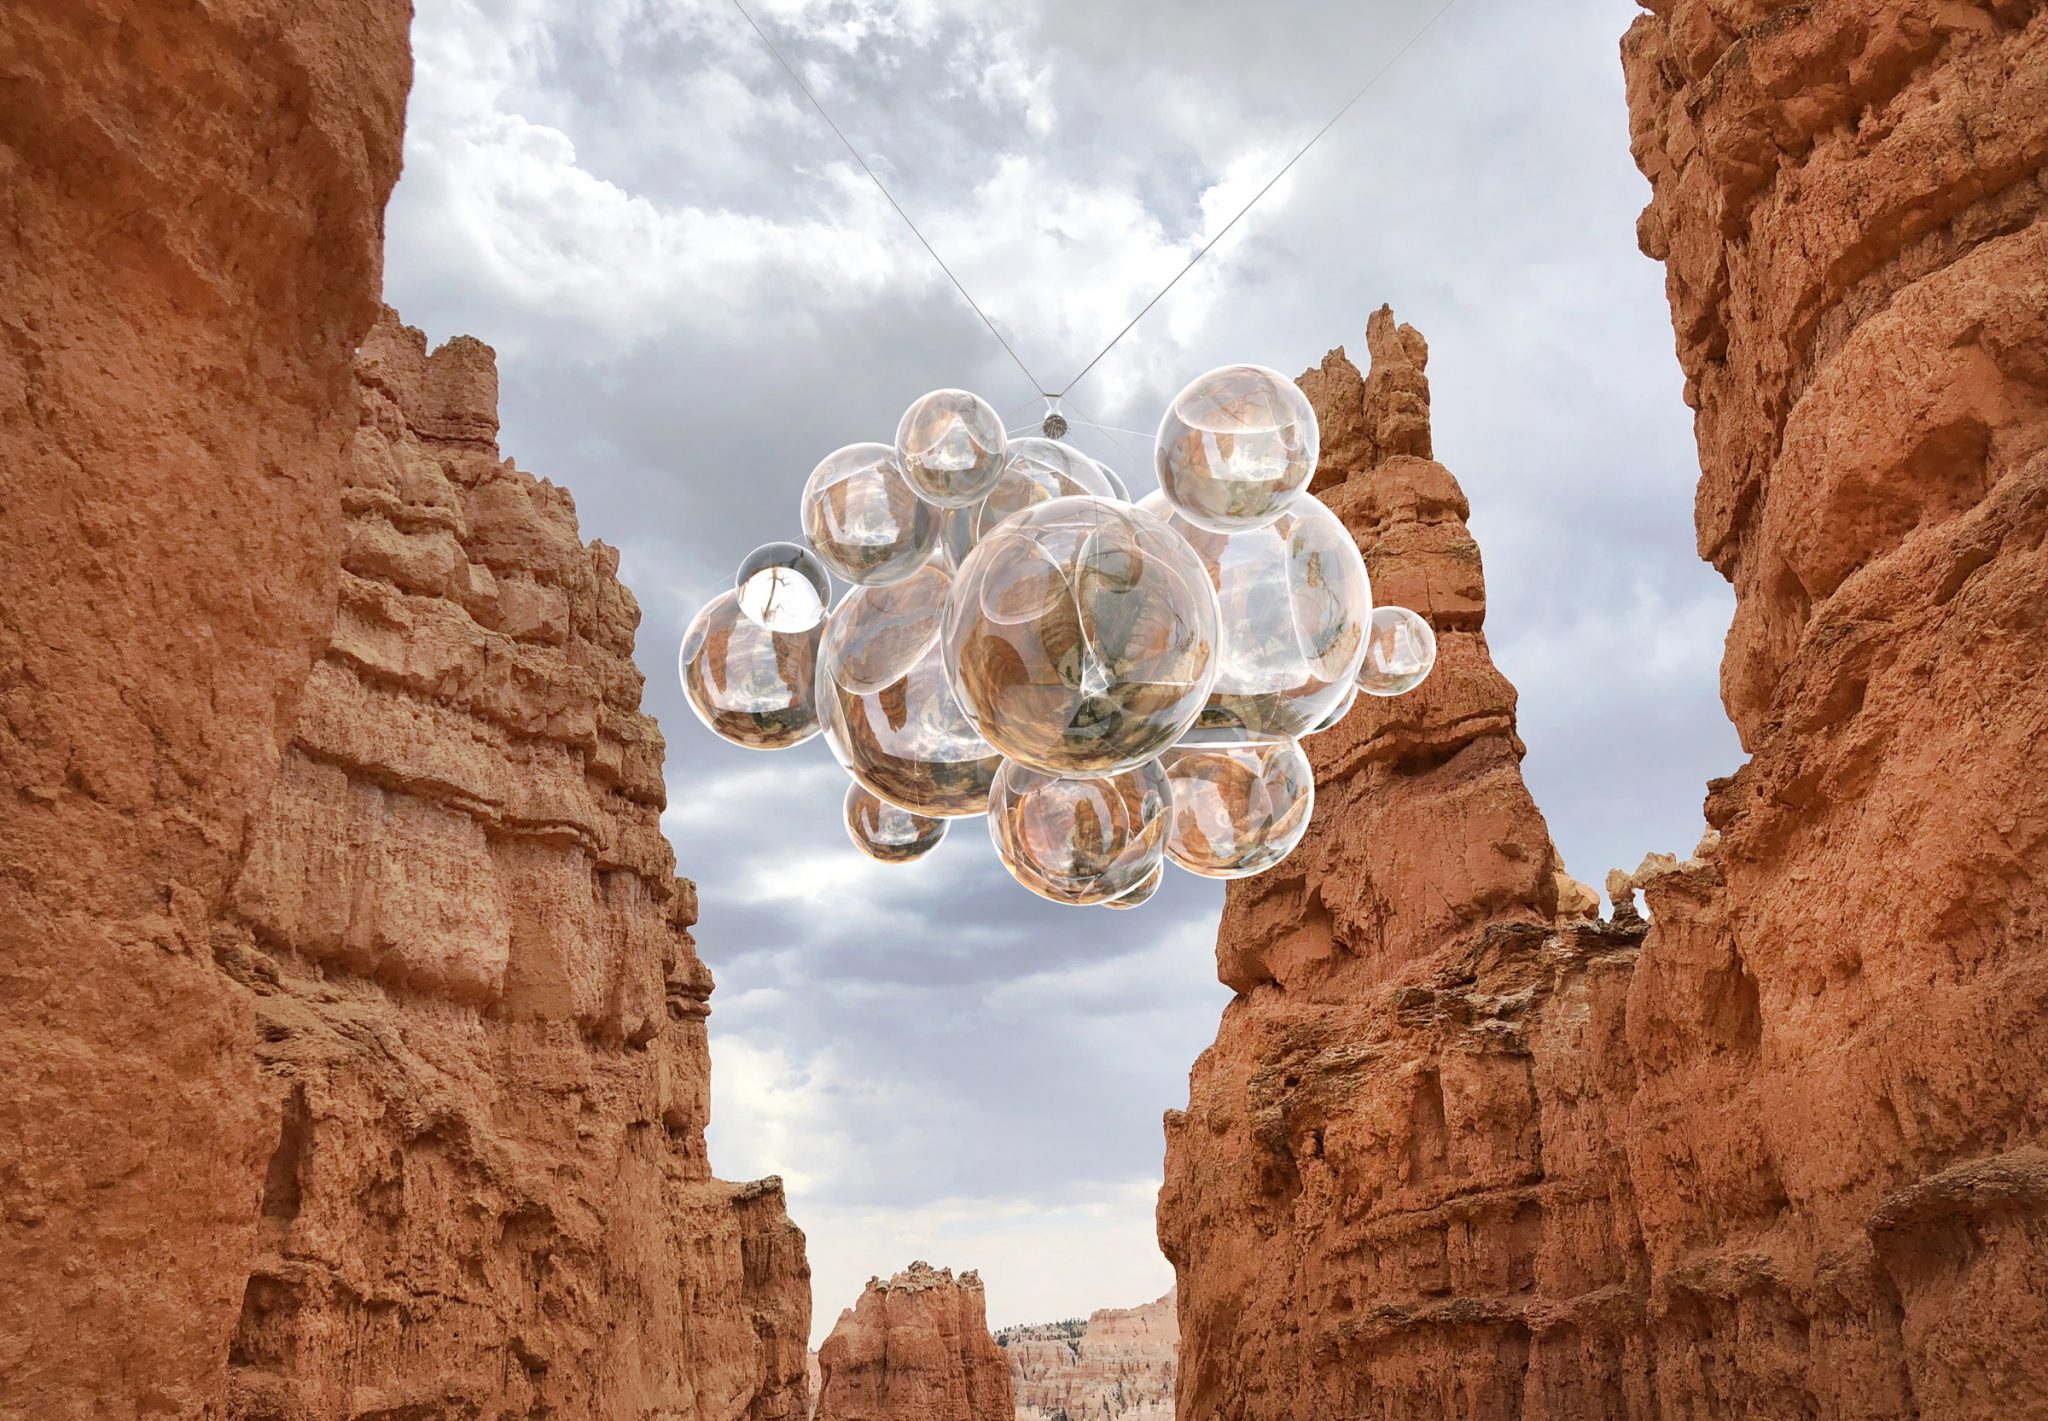 Bubbles in Canyon, Utah, USA / Vincent Leroy